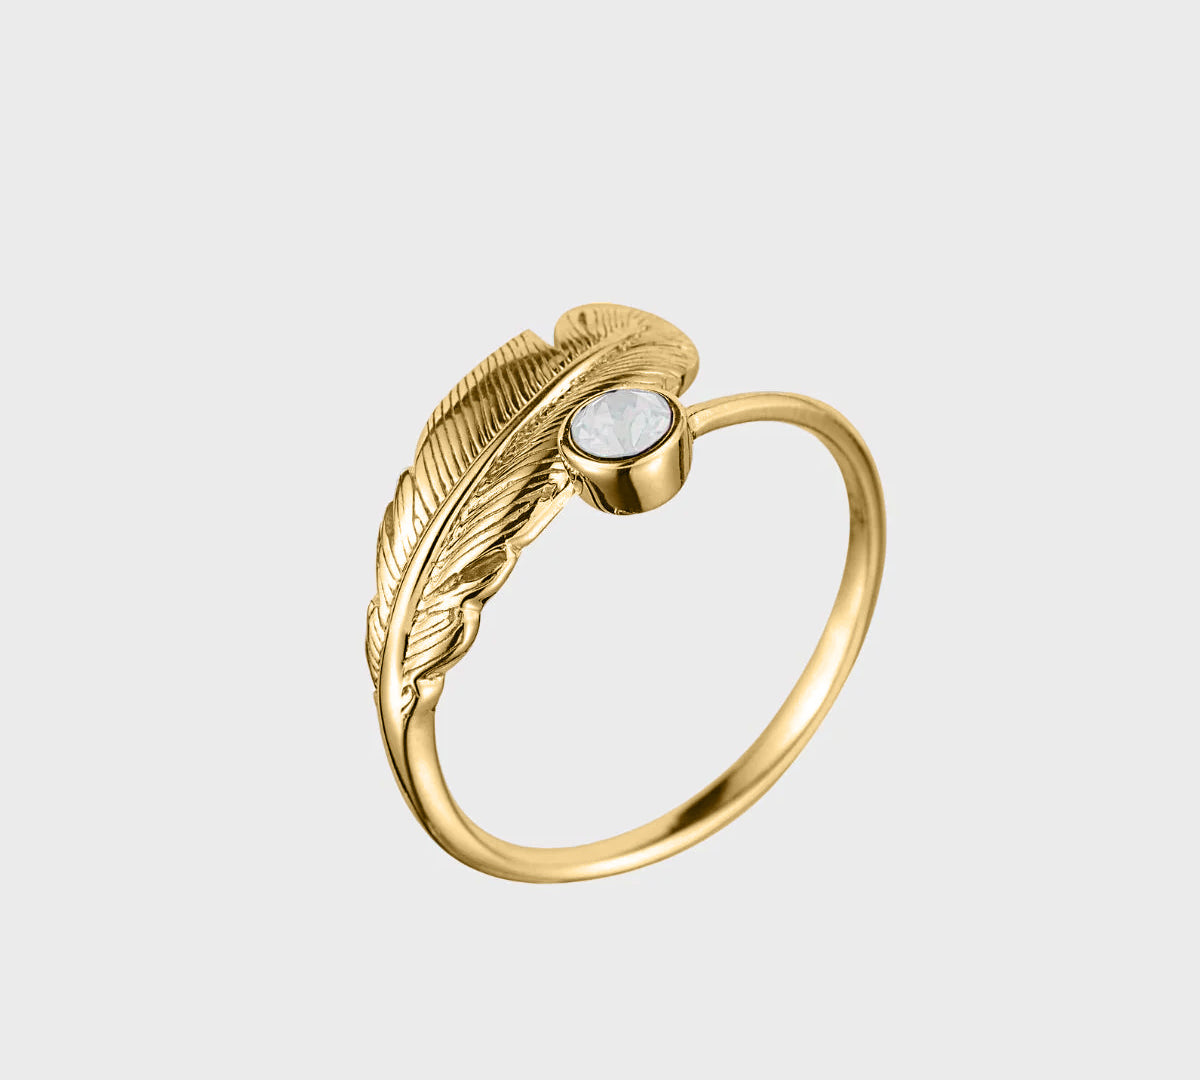 Adjustable Crystal Feather Birthstone Ring - October